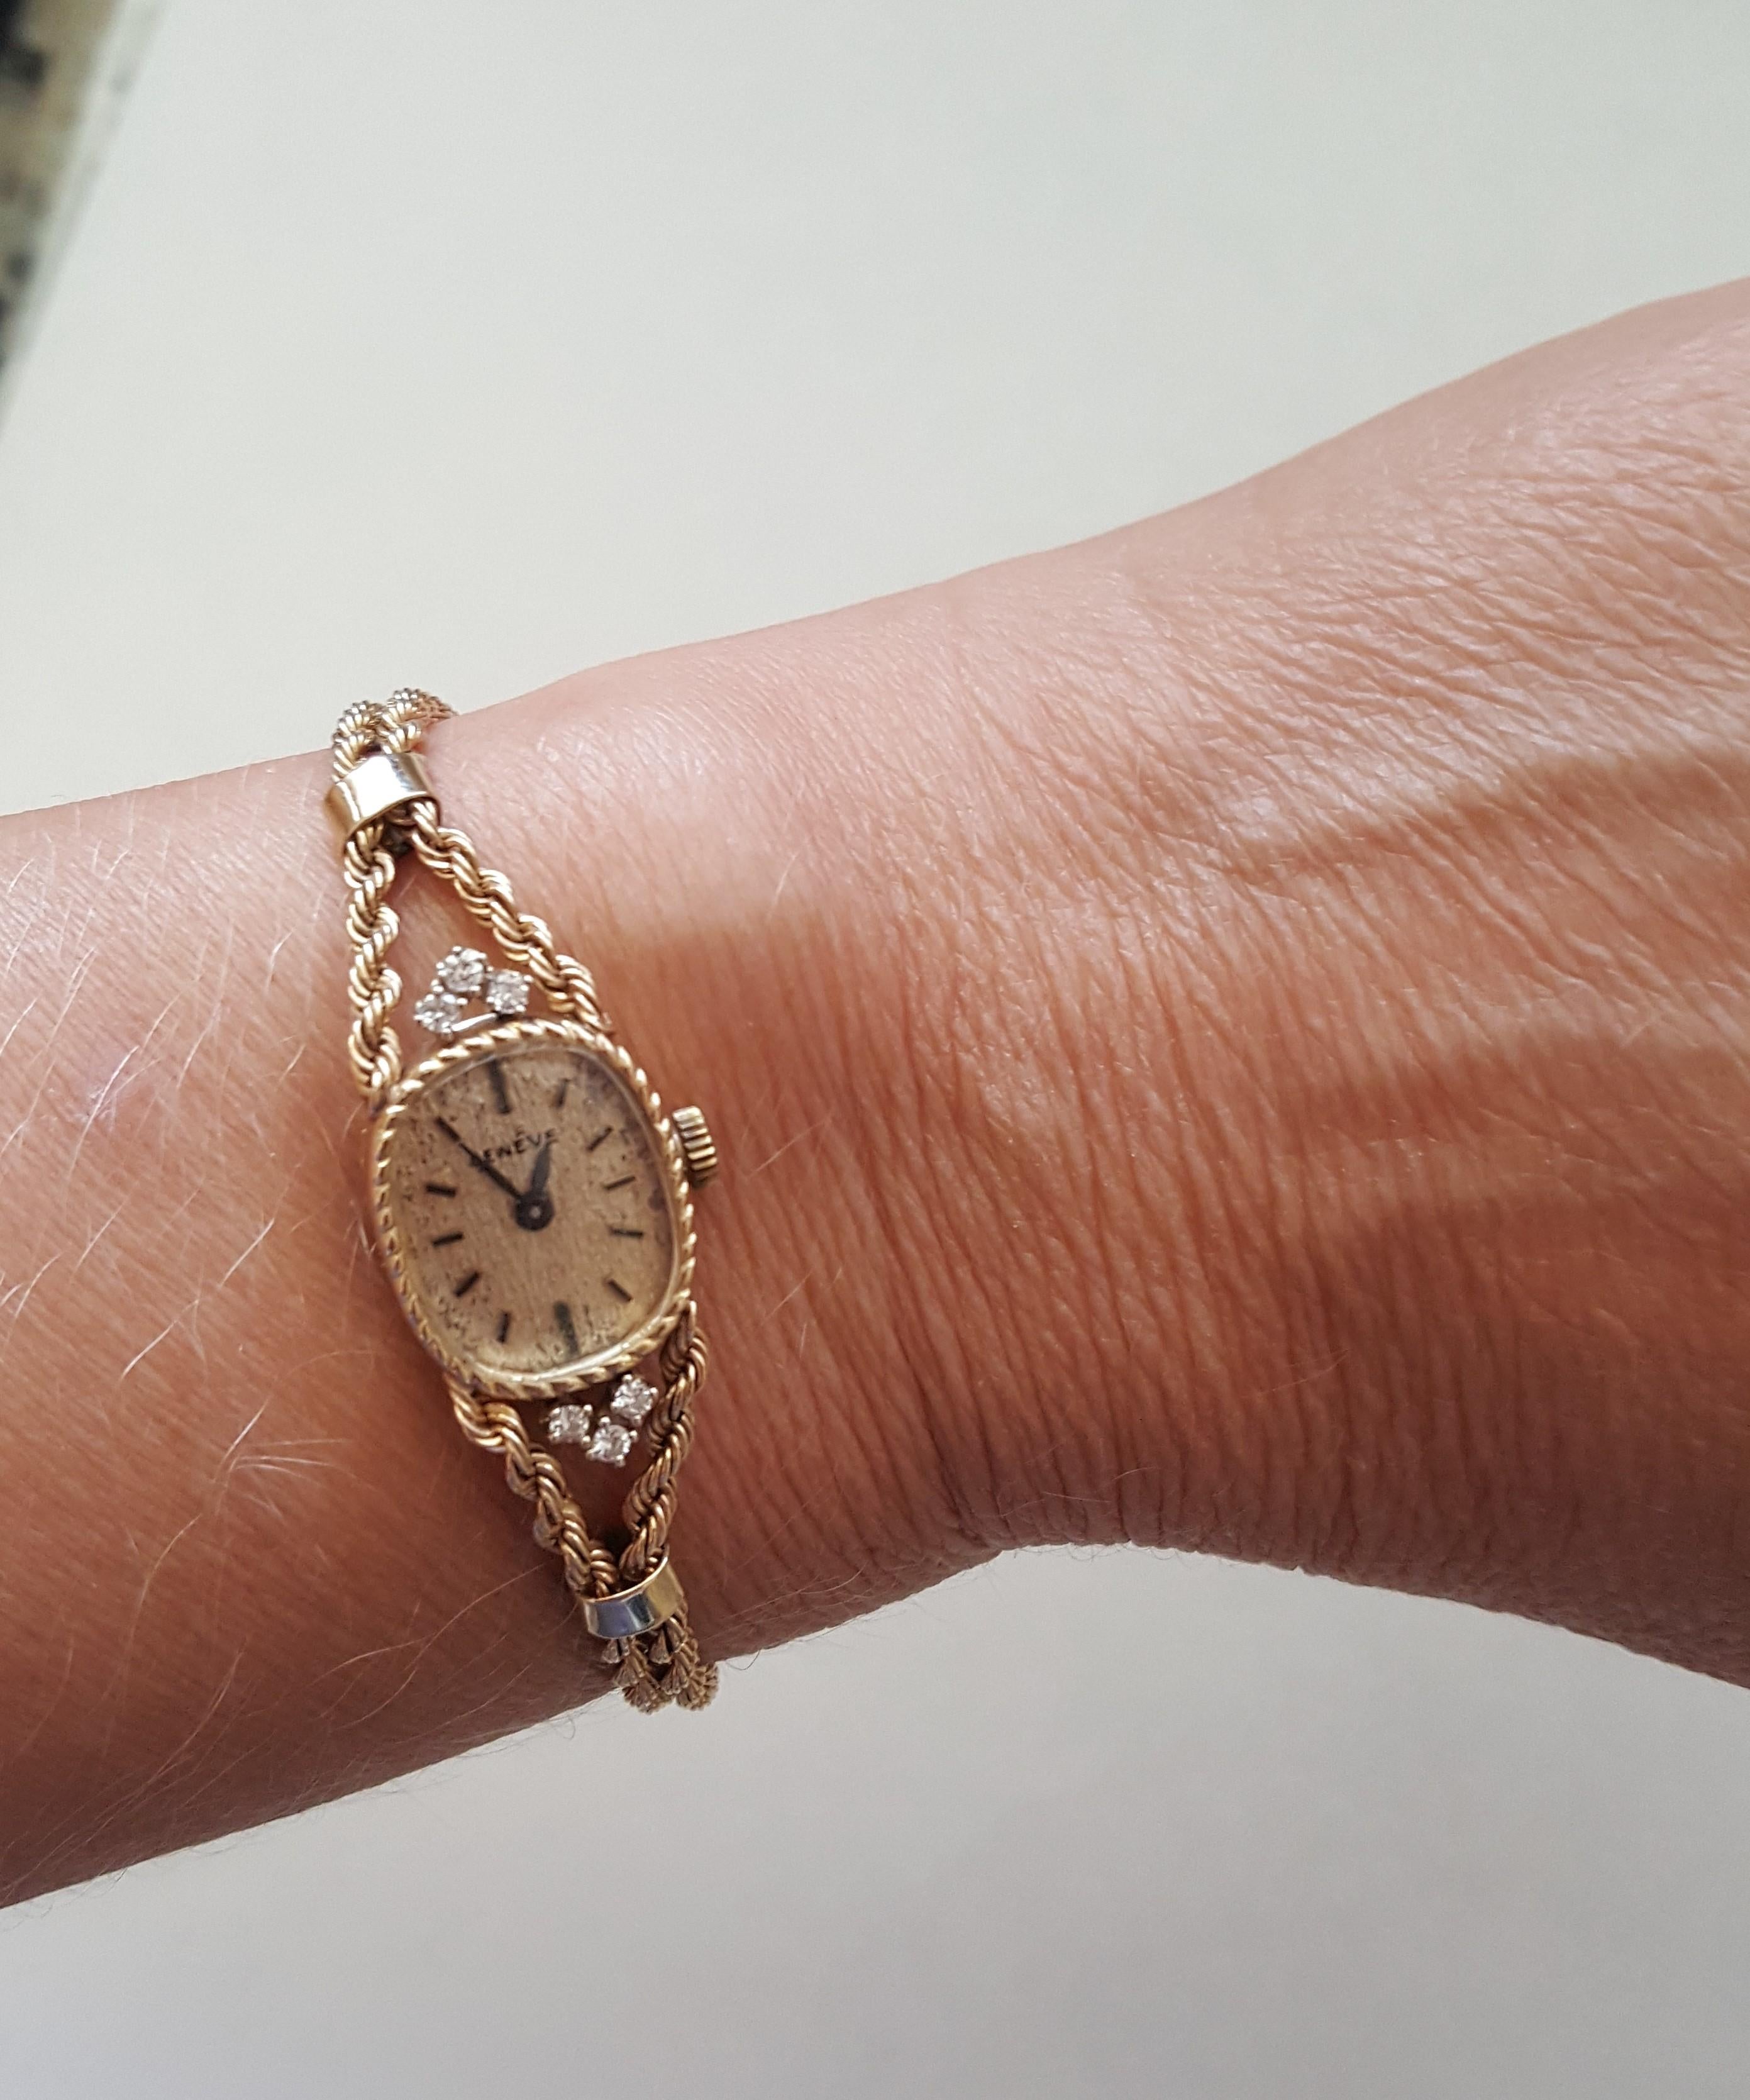 14kt Yellow Gold Ladies Geneve Watch, Rope Bracelet, 6 Diamonds of .15cttw, 10.8 gr. Vintage ladies watch in good, working condition. Case is 6.8mm x 15mm x 18 mm. The diamond weight is an approximation of .15cttw, G color and SI clarity.  The face